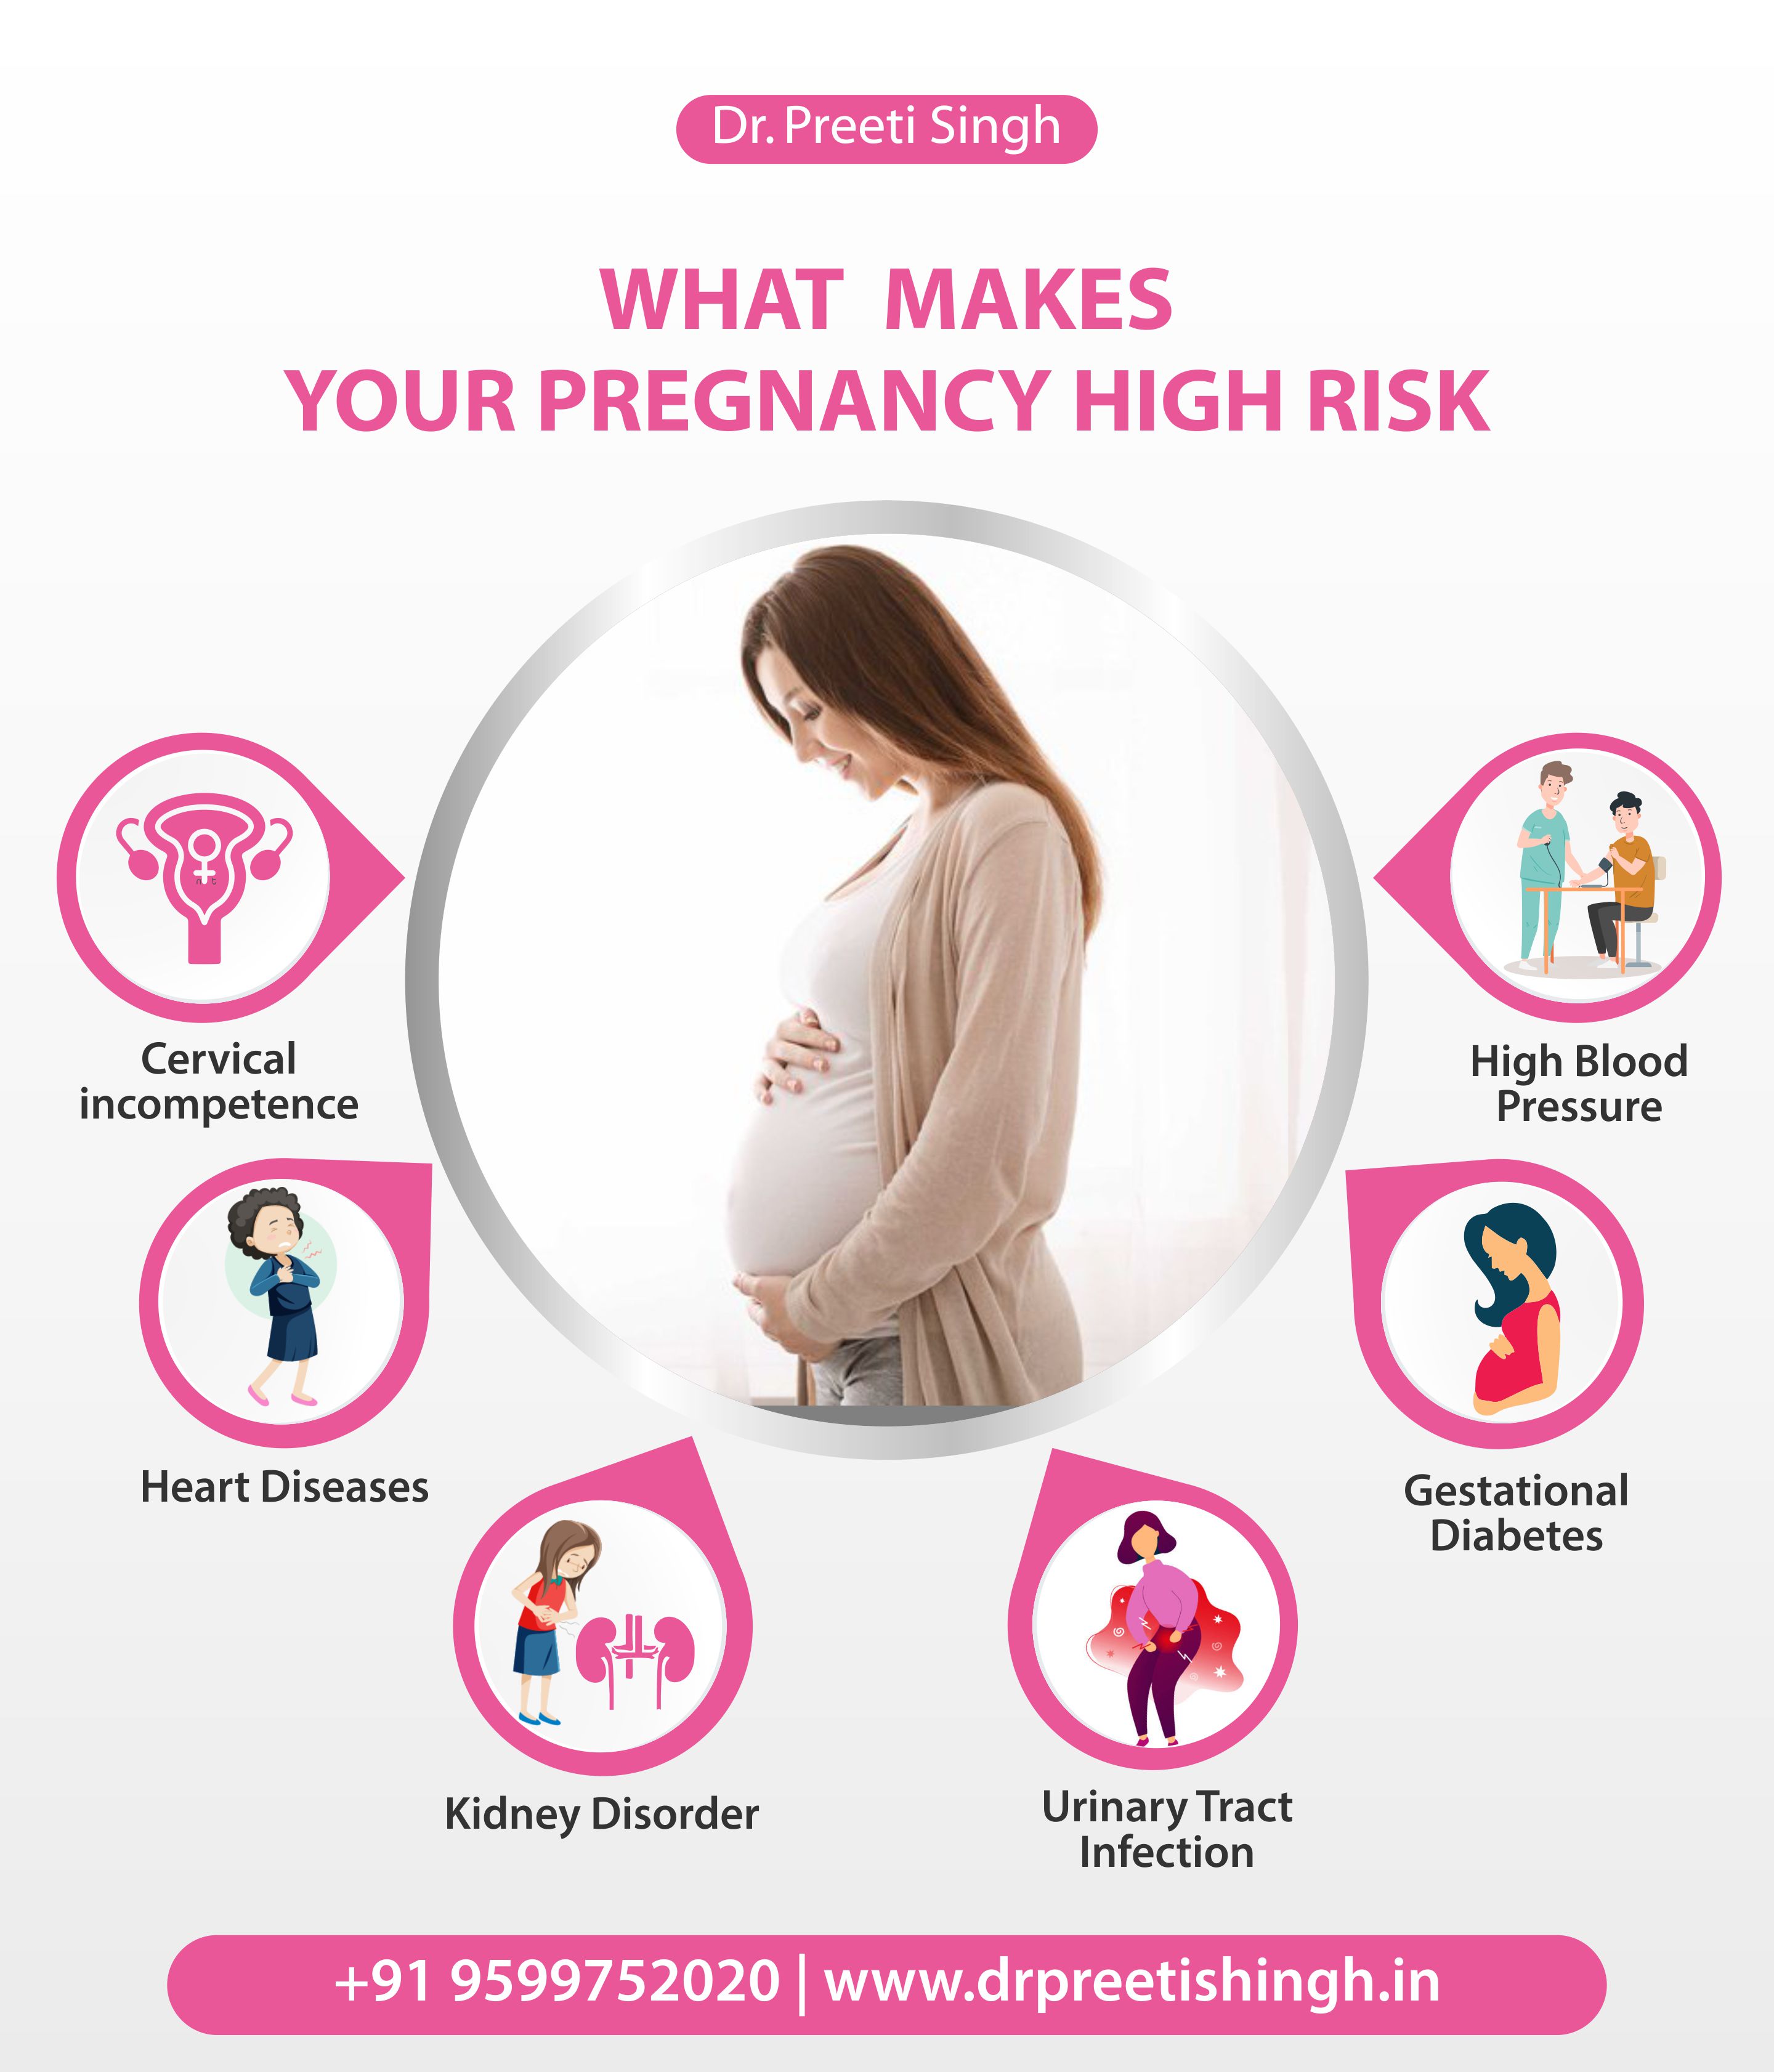 7 tips to manage high-risk pregnancy